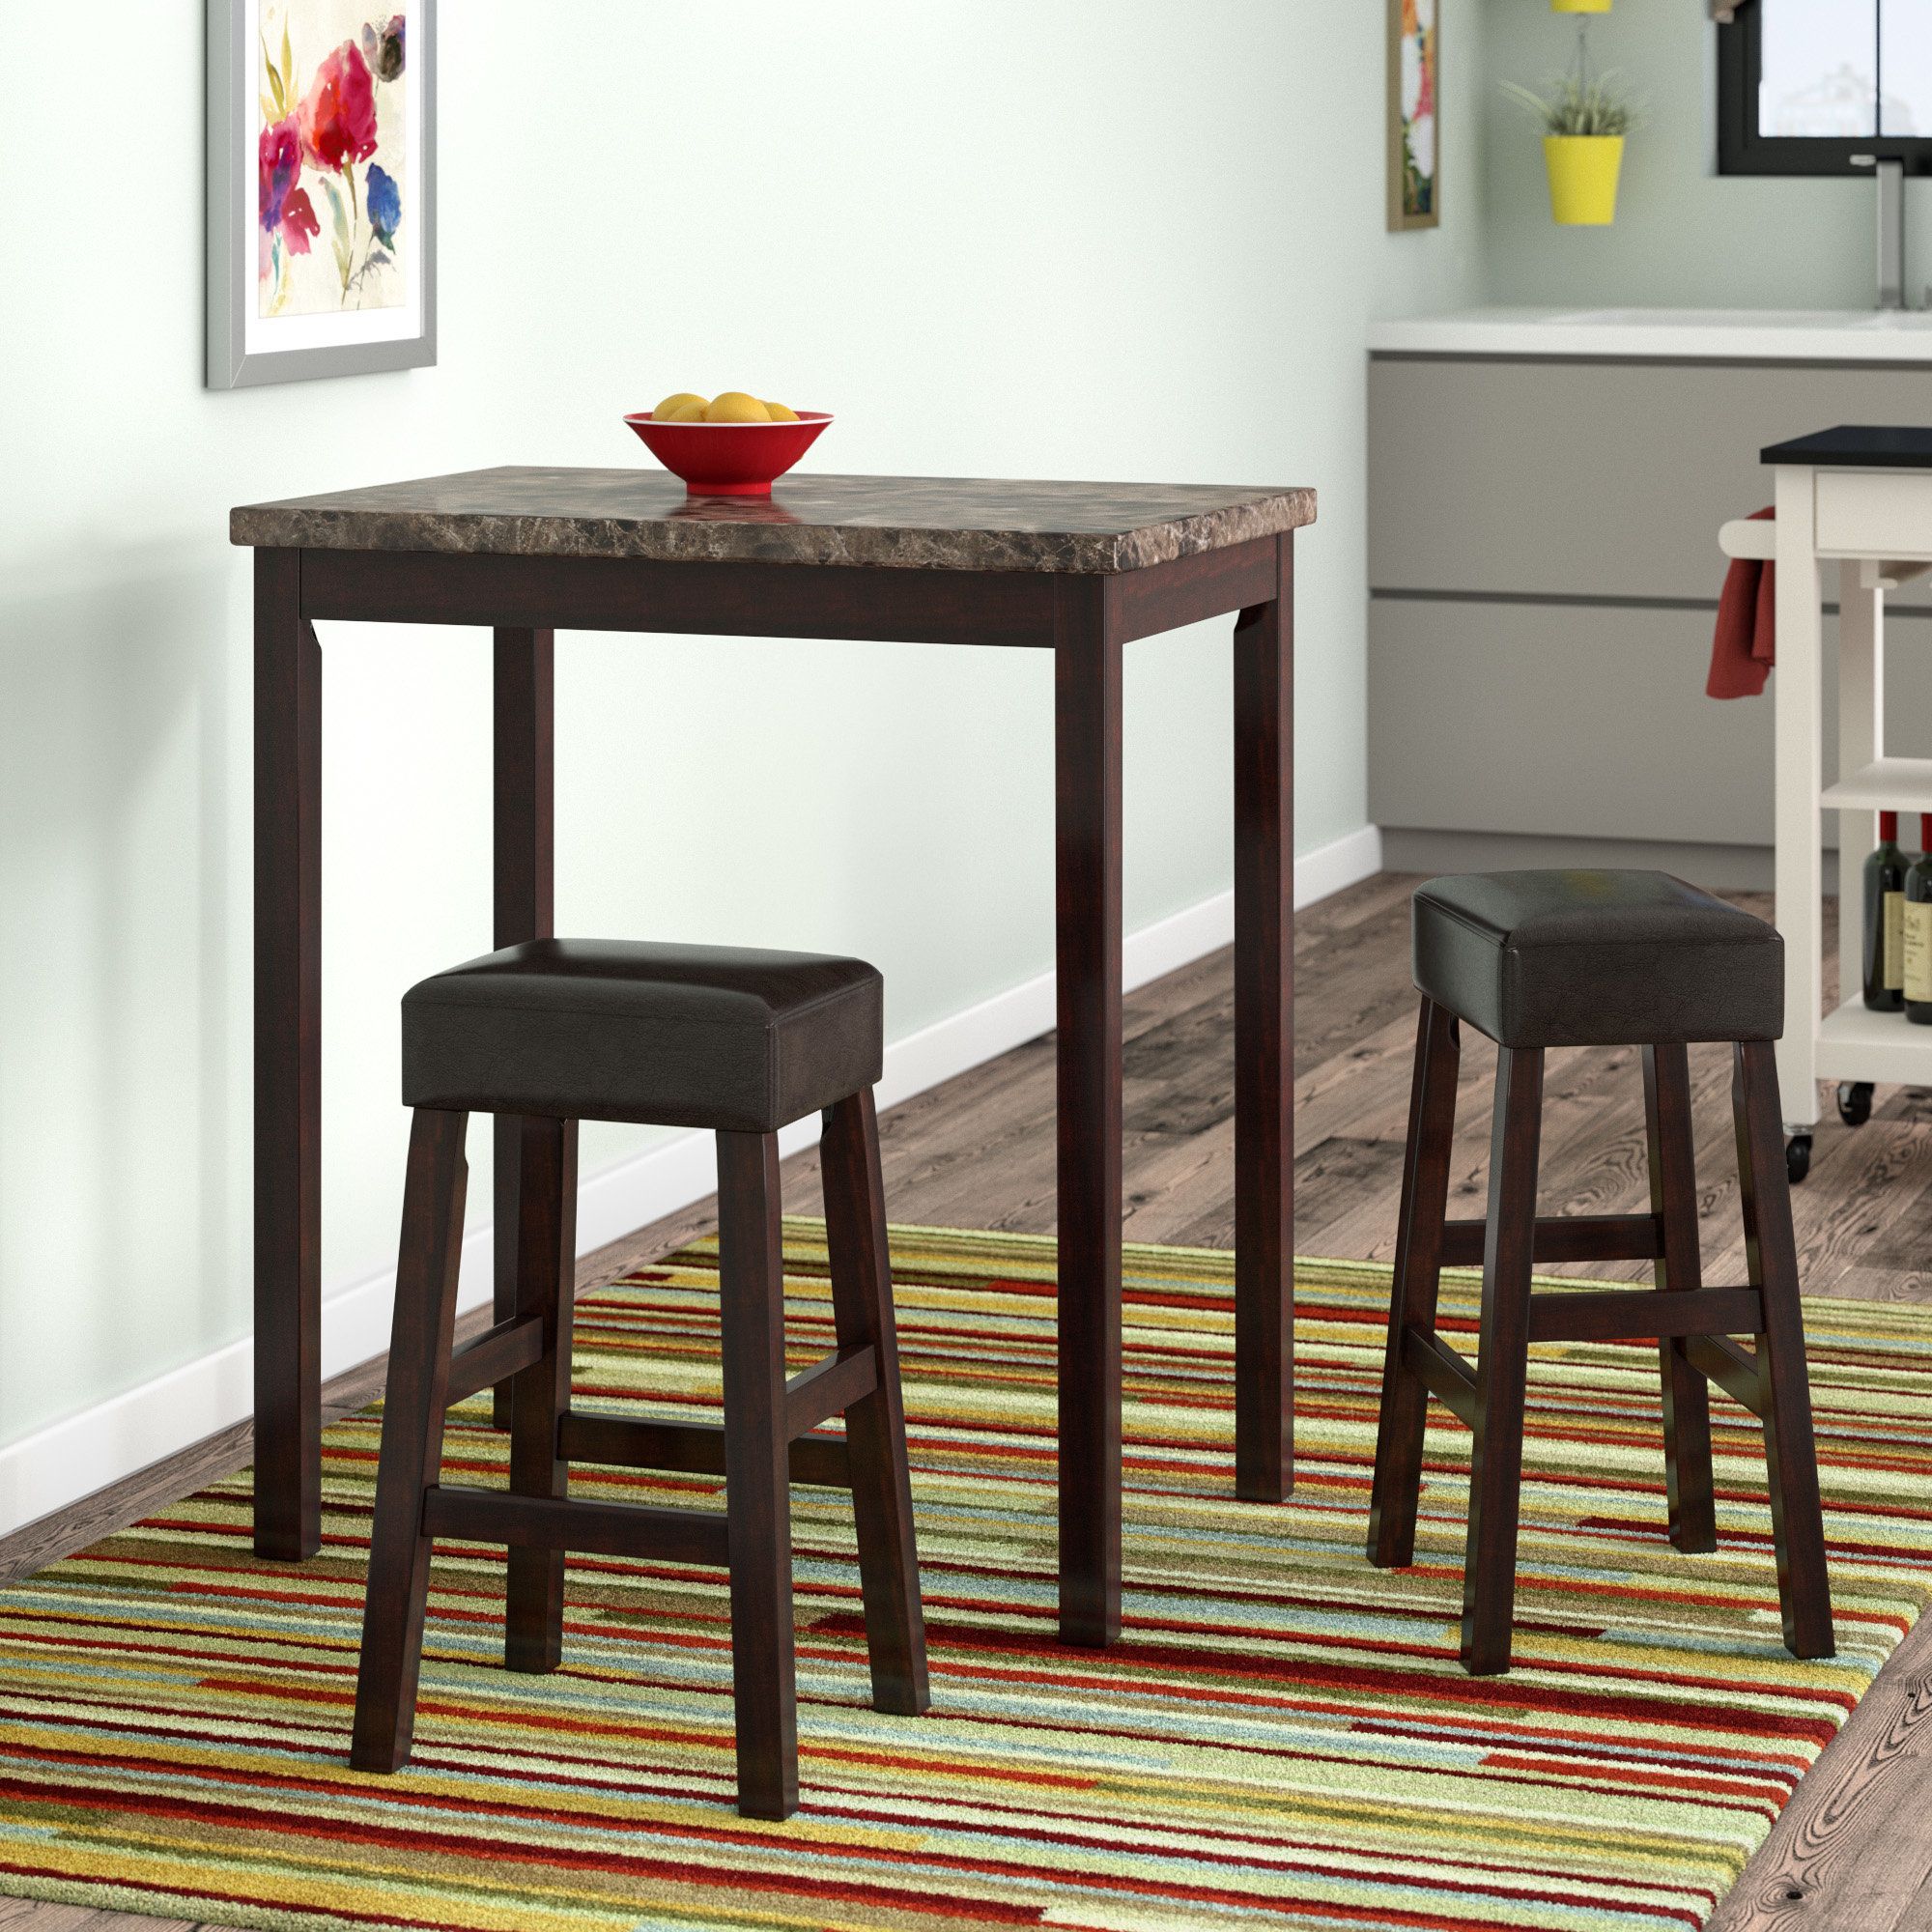 Wayfair Regarding Most Recently Released Askern 3 Piece Counter Height Dining Sets (set Of 3) (View 4 of 20)